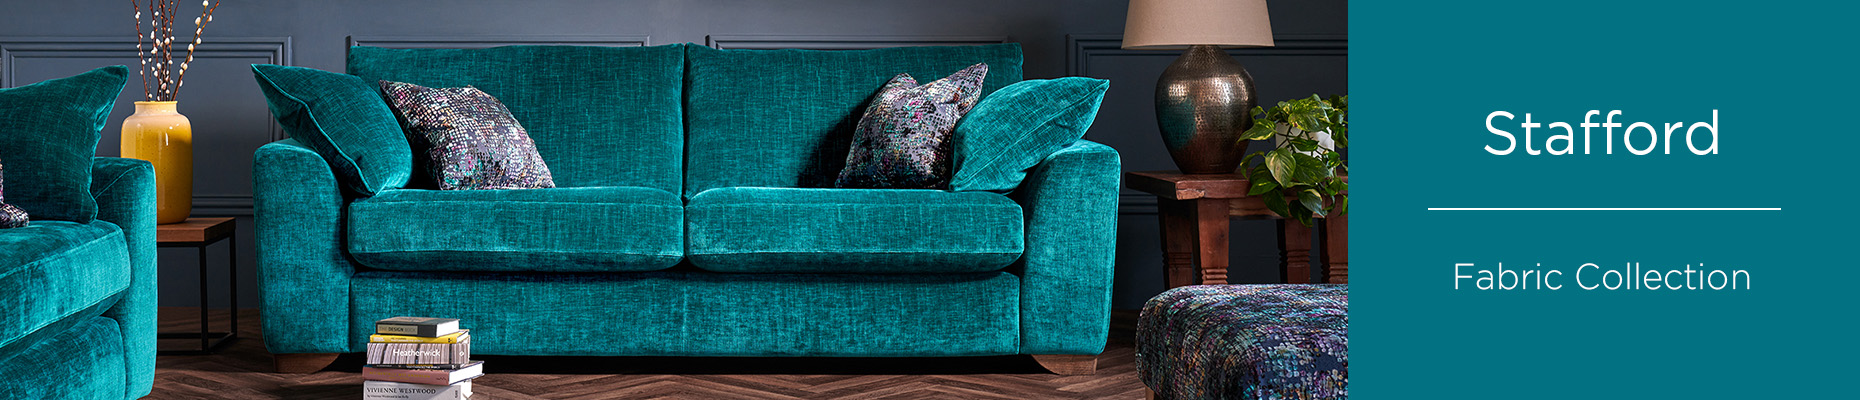 Stafford Fabric Sofa collection at Forrest Furnishing